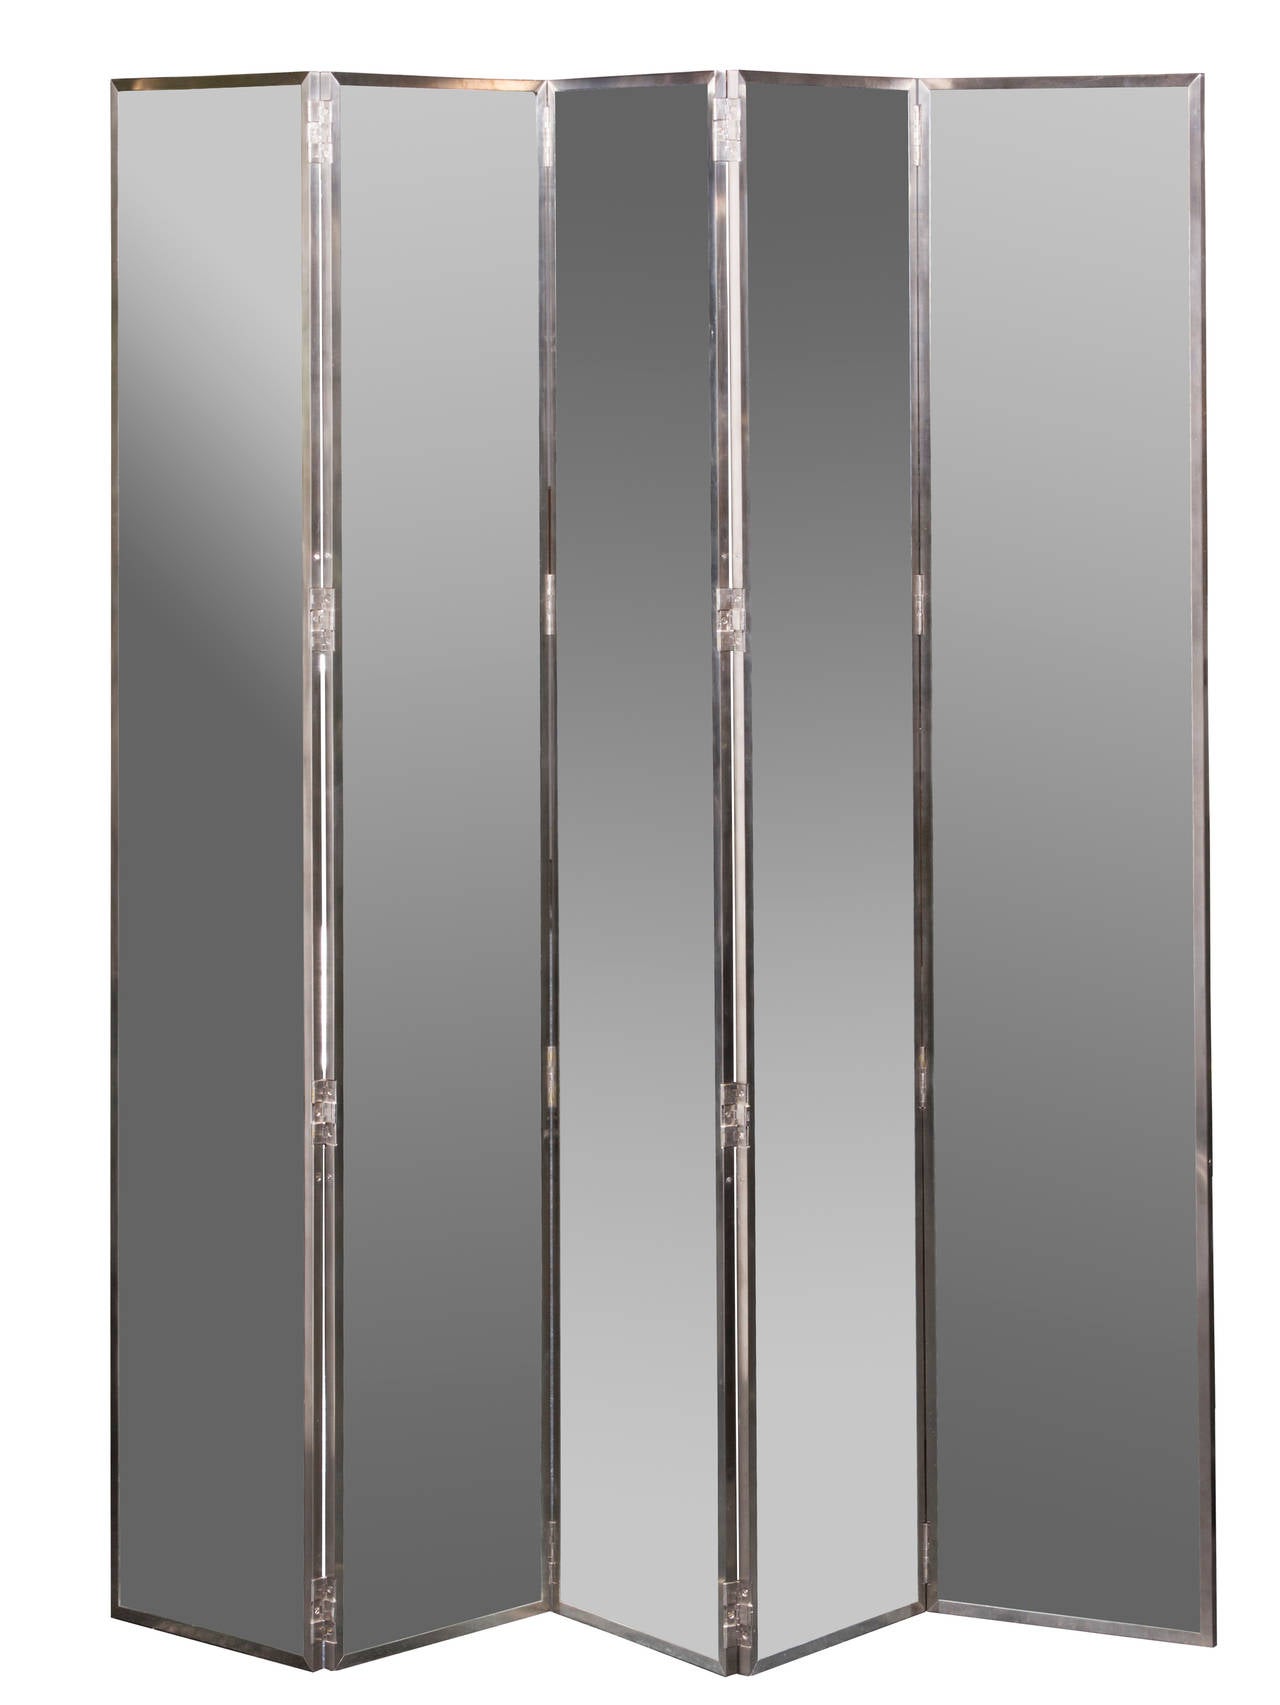 This is a wonderful Machine Age piece. Nickel-plated metal frame the tall glass panels. The tall panels are very sturdy.